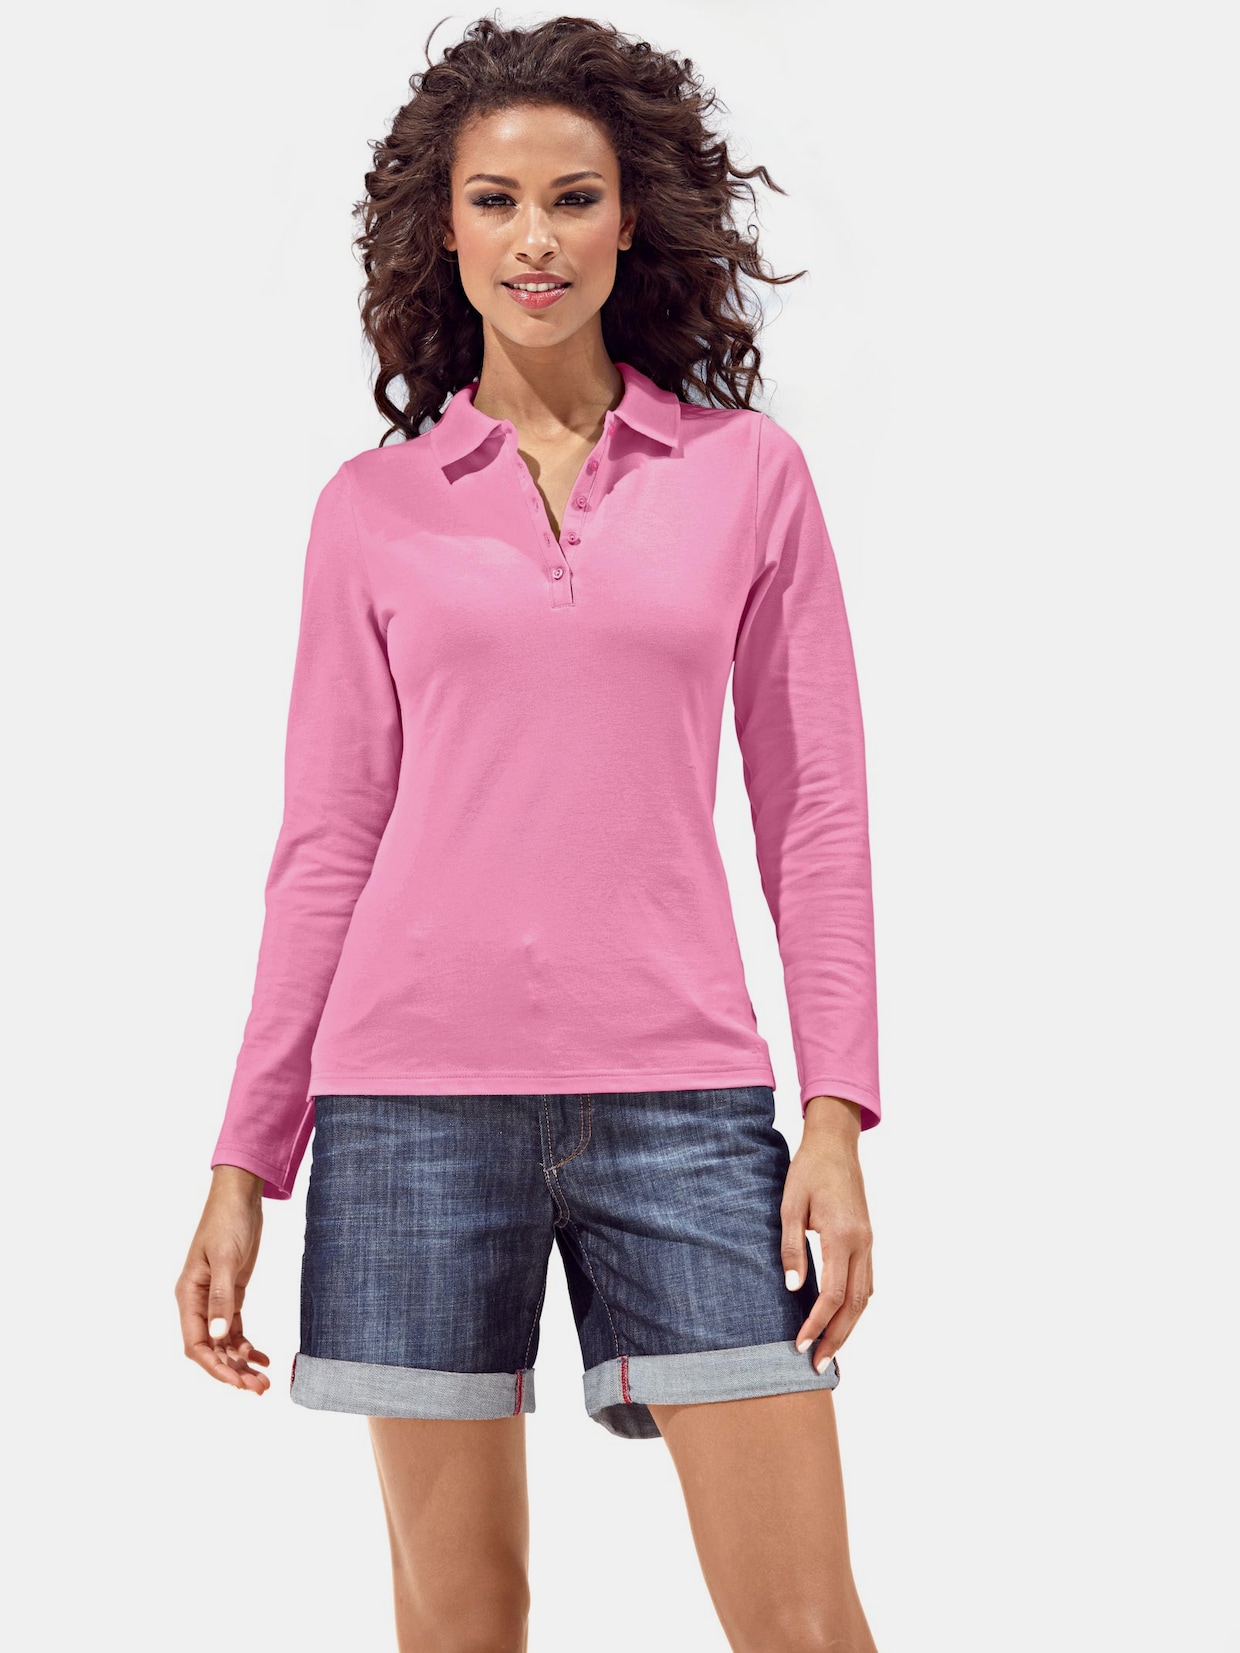 Best Connections Poloshirt - pink